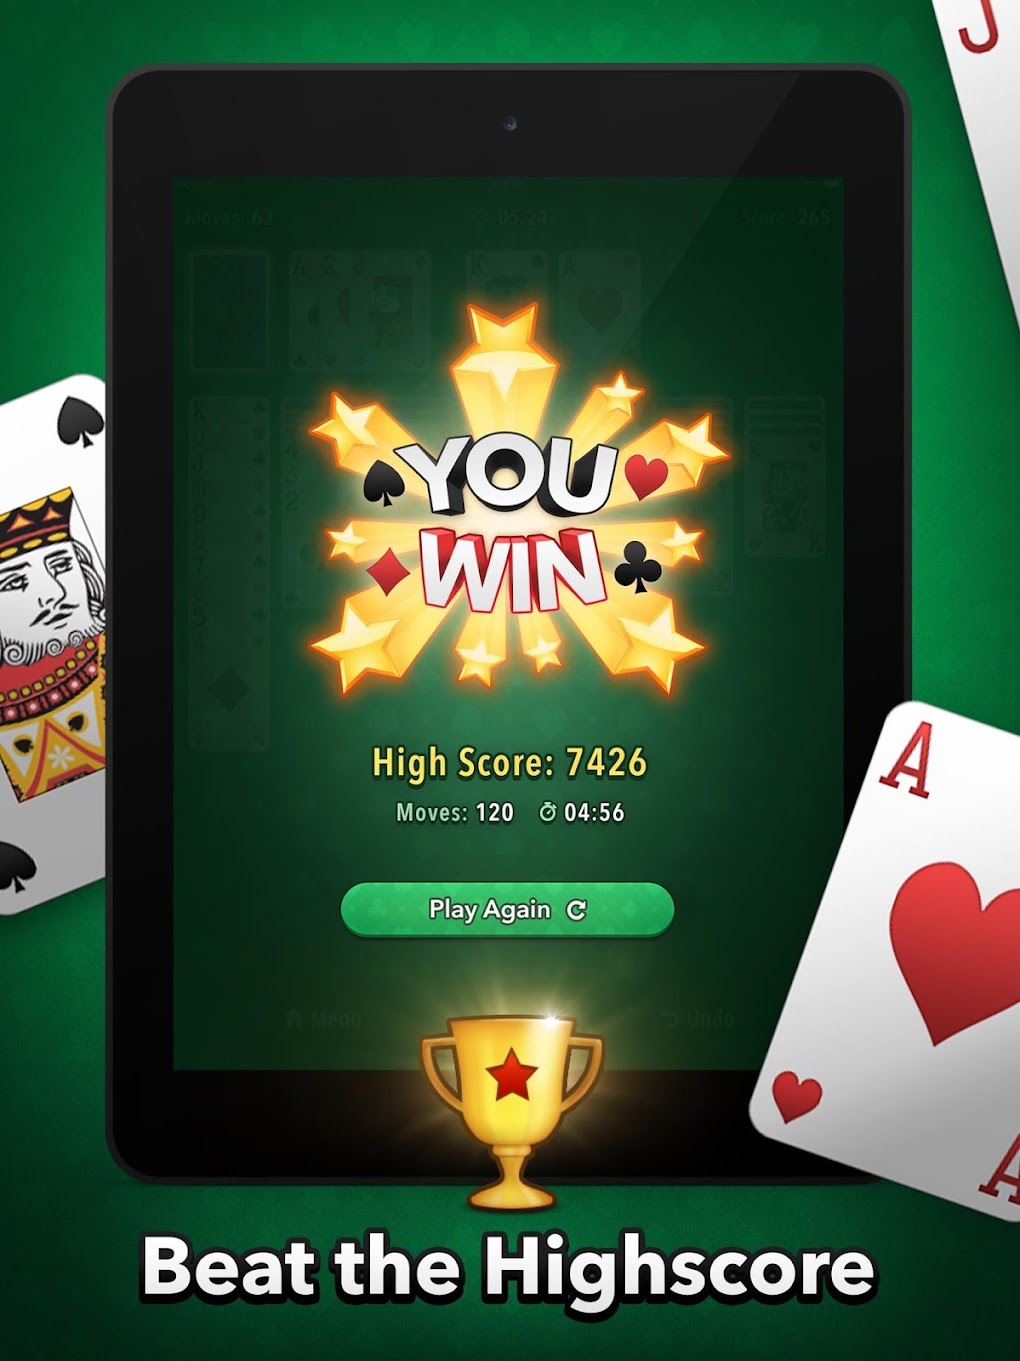 Freecell Solitaire  Play Free Online at Solitaire 365